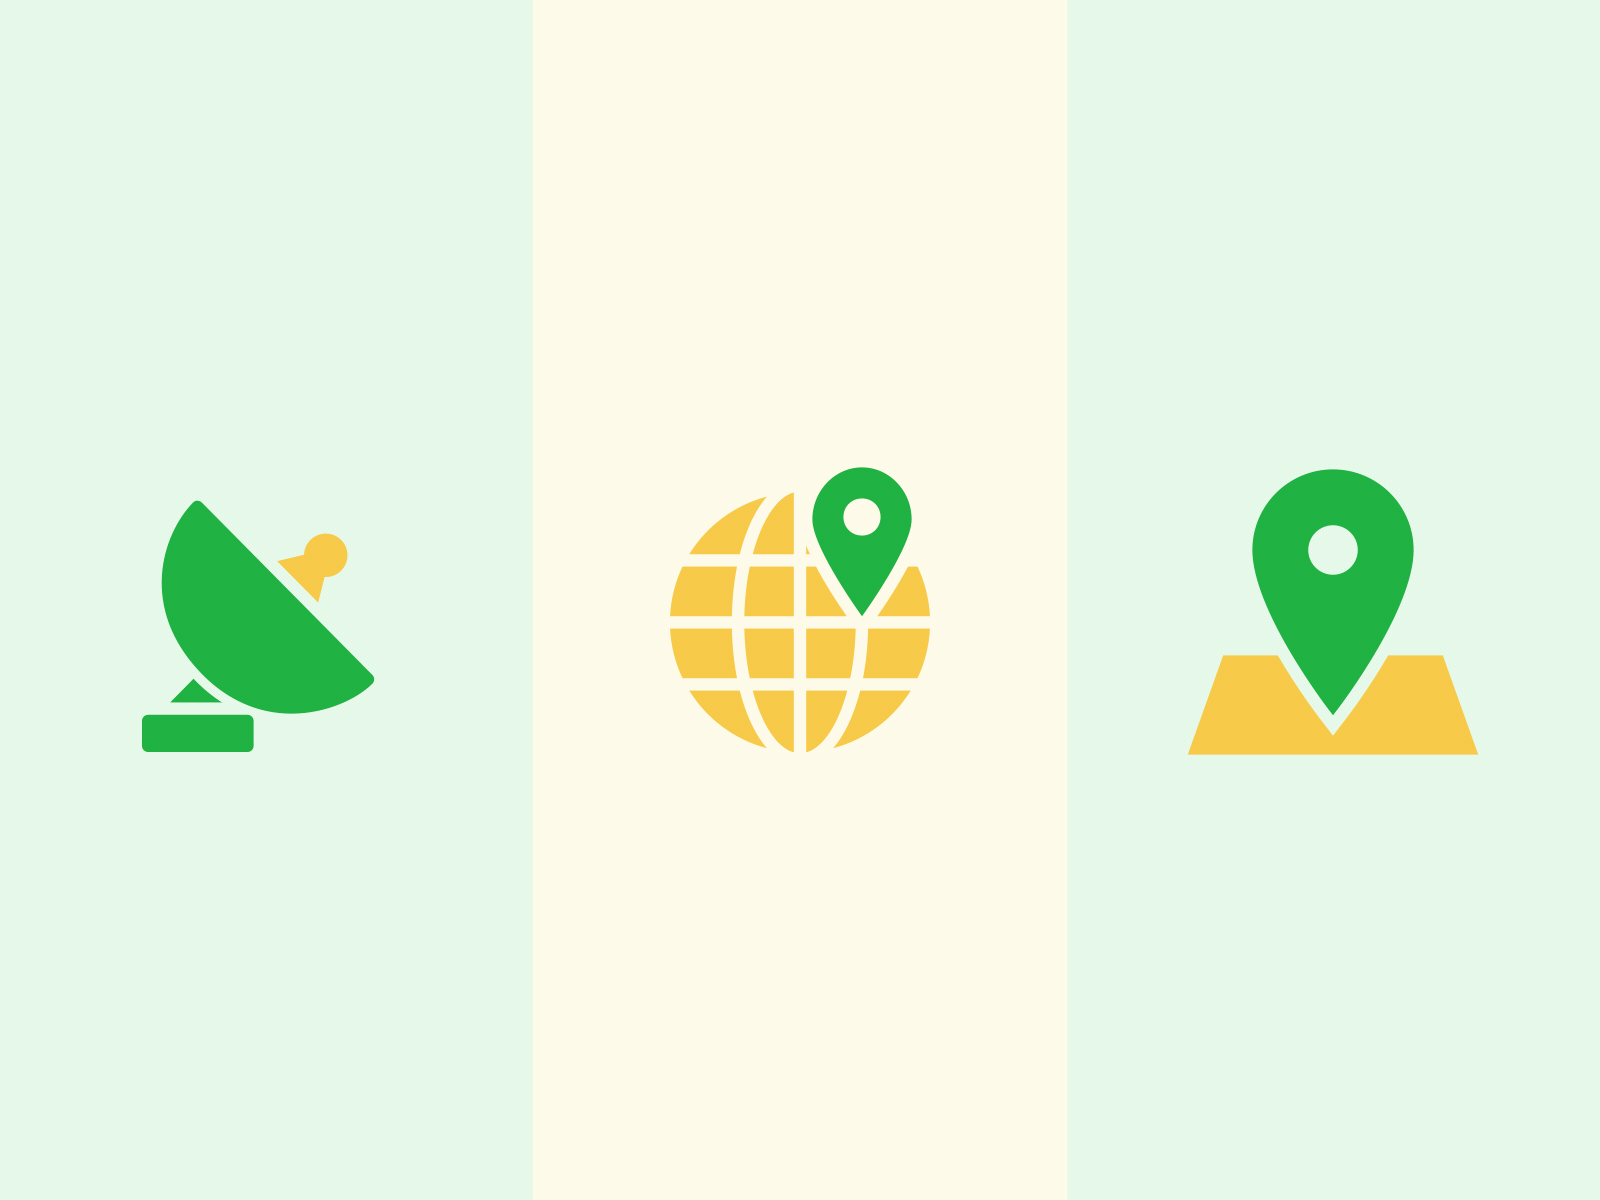 Location animated icons by Nikita Kozin for Icons8 on Dribbble